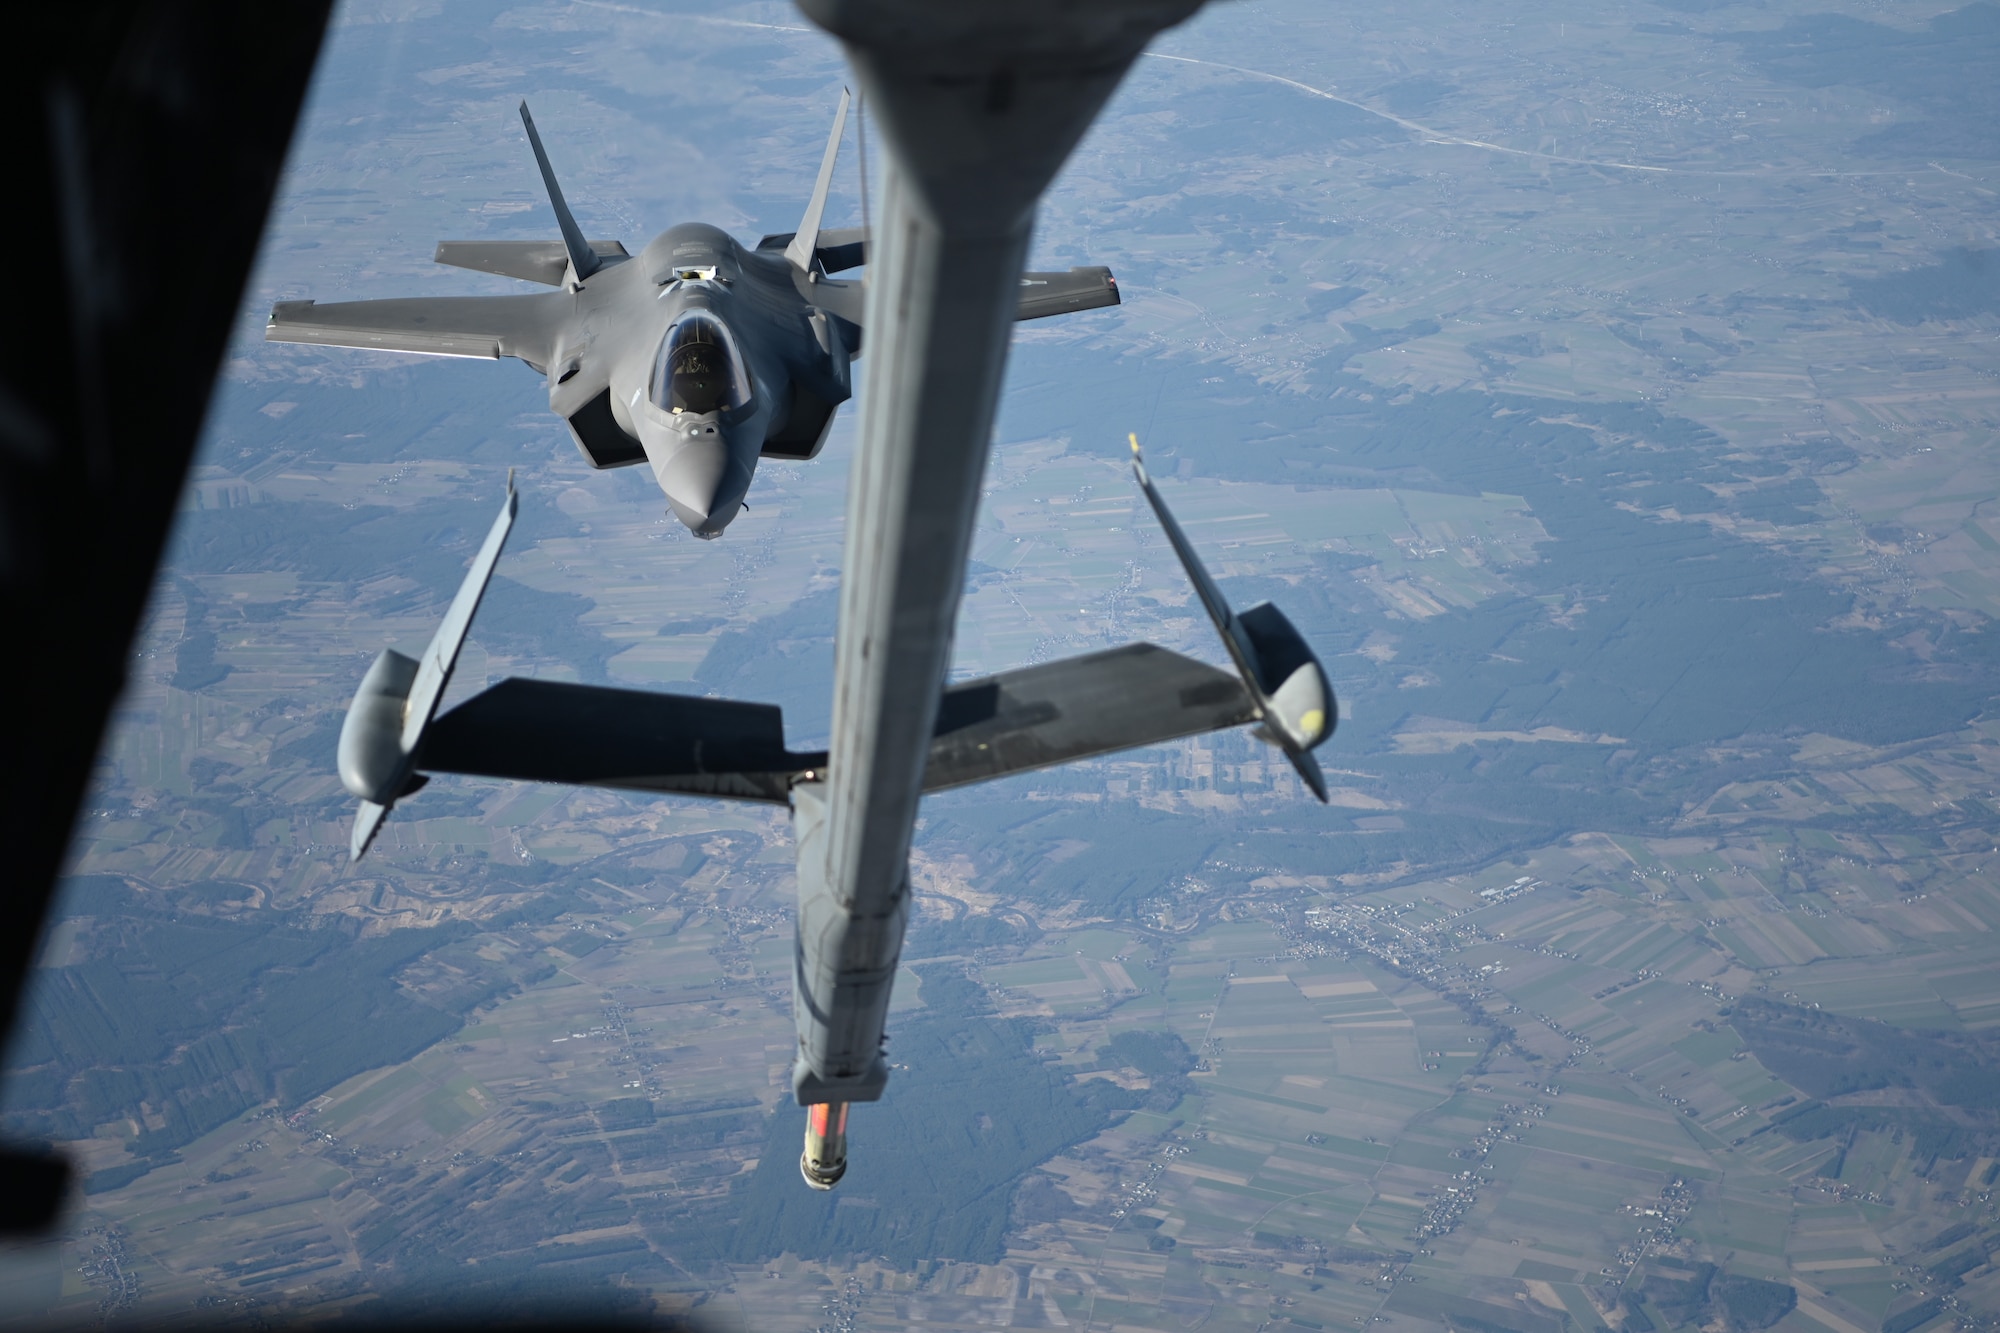 A U.S. Air Force F-35 Lightning II aircraft assigned to the 34th Fighter Squadron approaches a KC-10 Extender aircraft to receive fuel over Poland, Feb. 24, 2022. The F-35s, originally from Hill Air Force Base, Utah, are forward deployed to NATO’s eastern flank to support NATO’s Enhanced Air Policing mission. (U.S. Air Force photo by Senior Airman Joseph Barron)